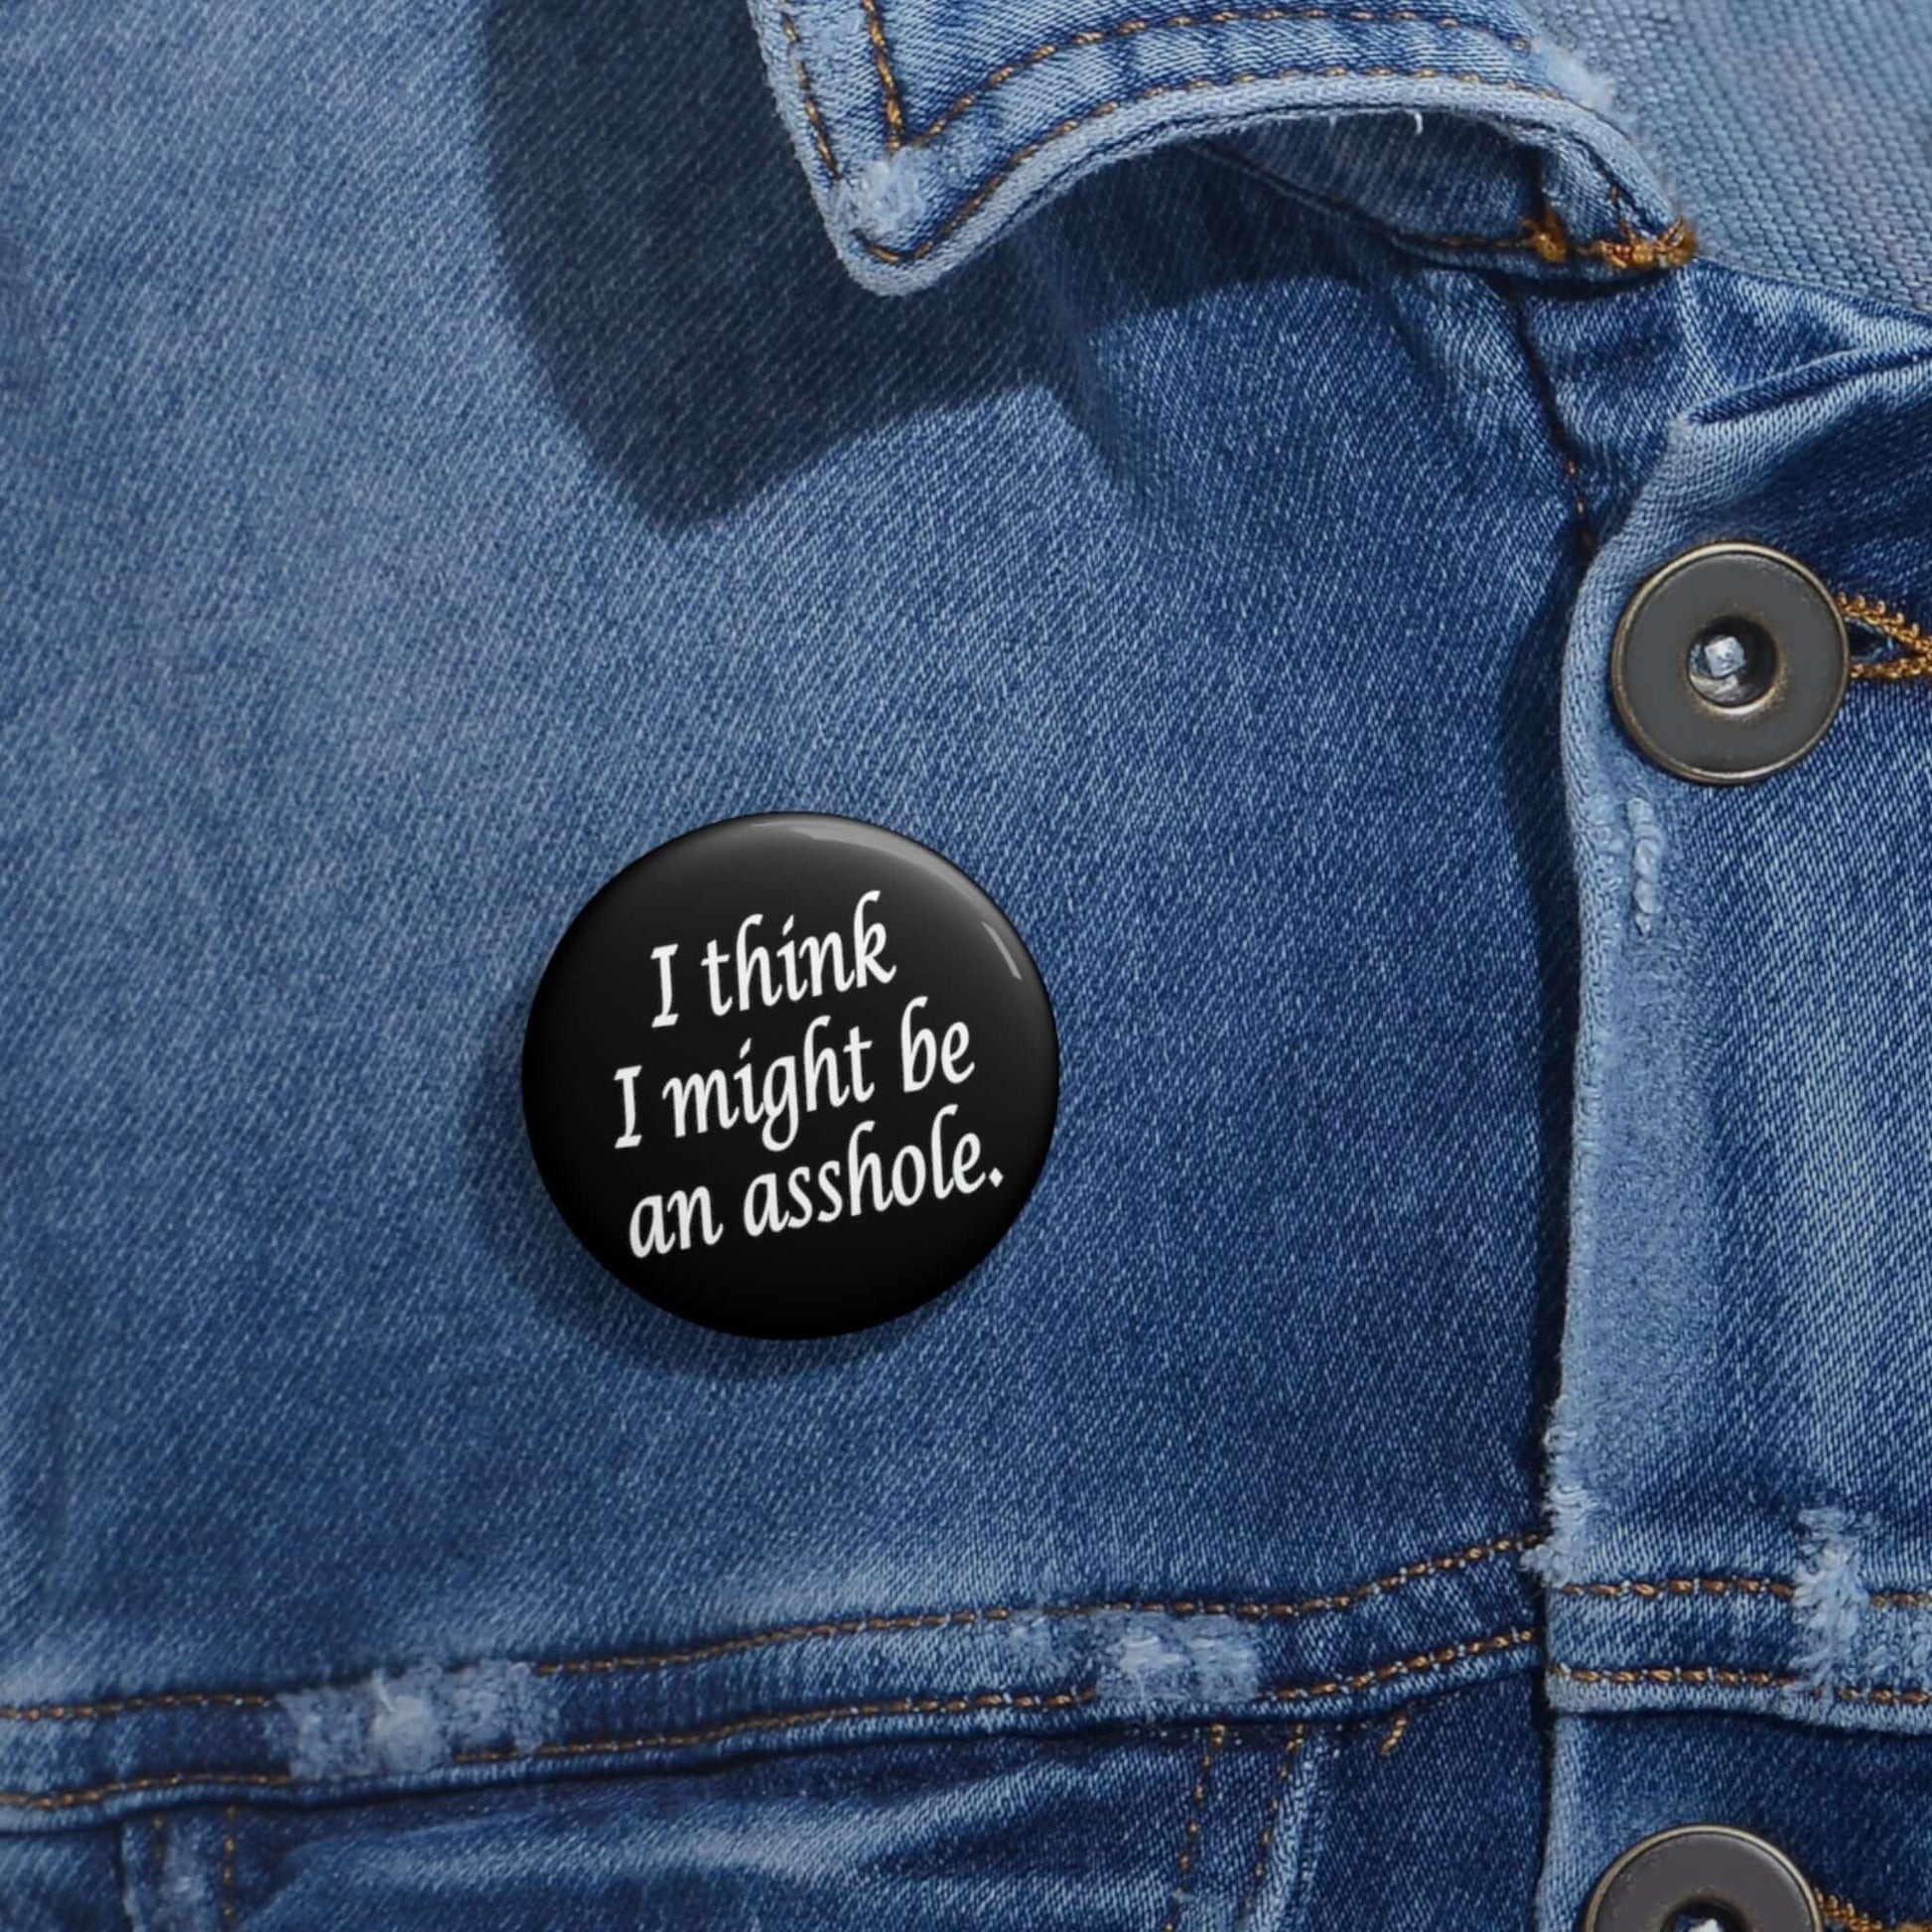 I think I might be an asshole pin-back button.